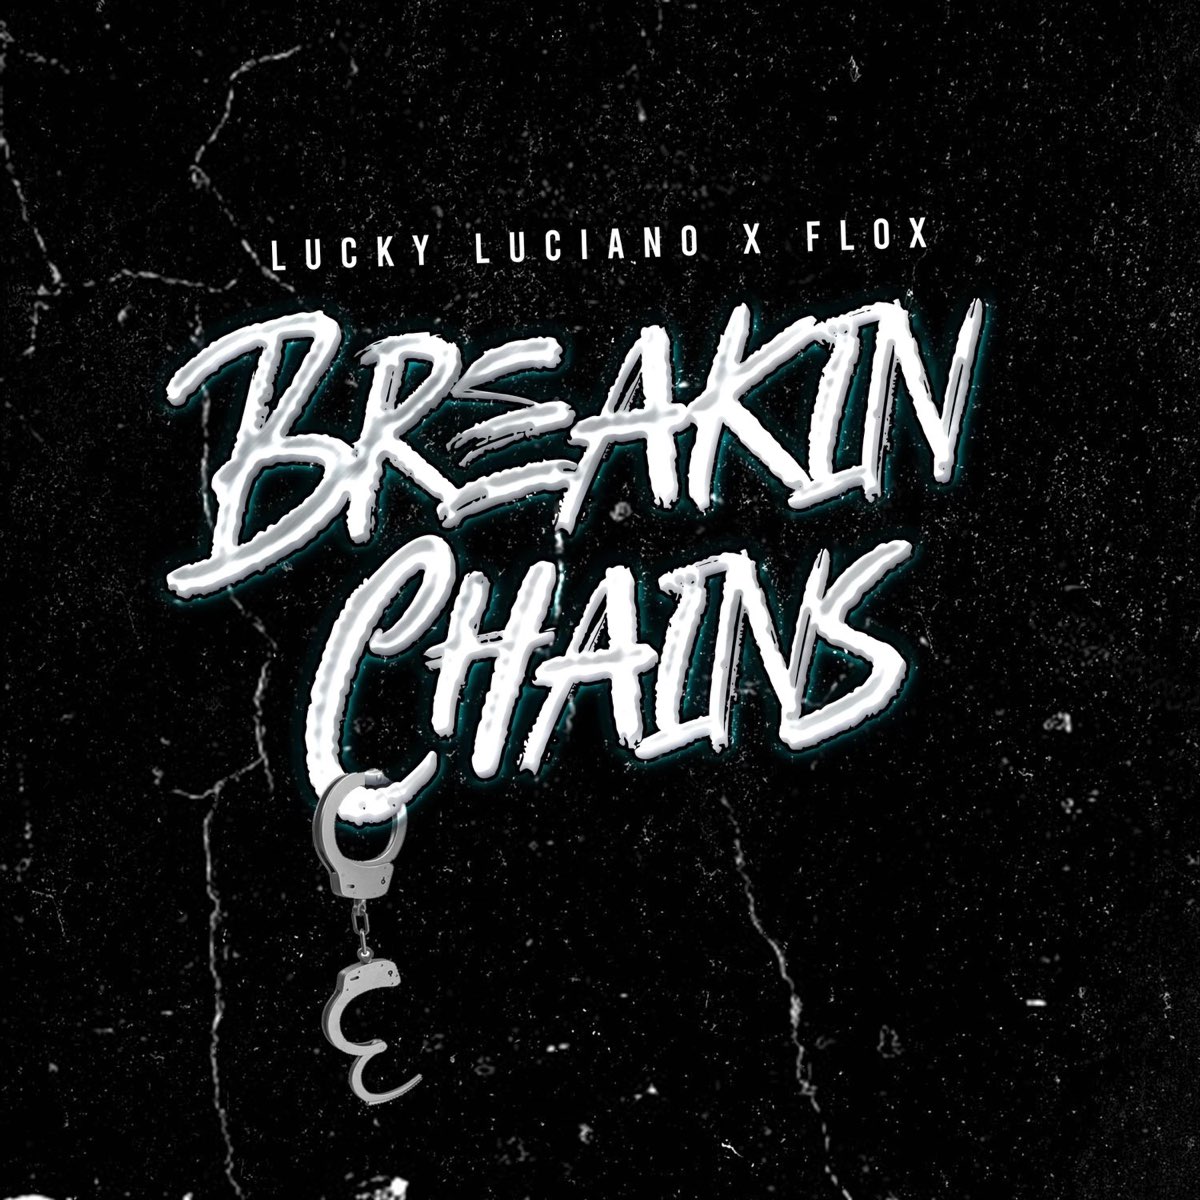 Breakin' Chains - Album by Lucky Luciano & Flox - Apple Music